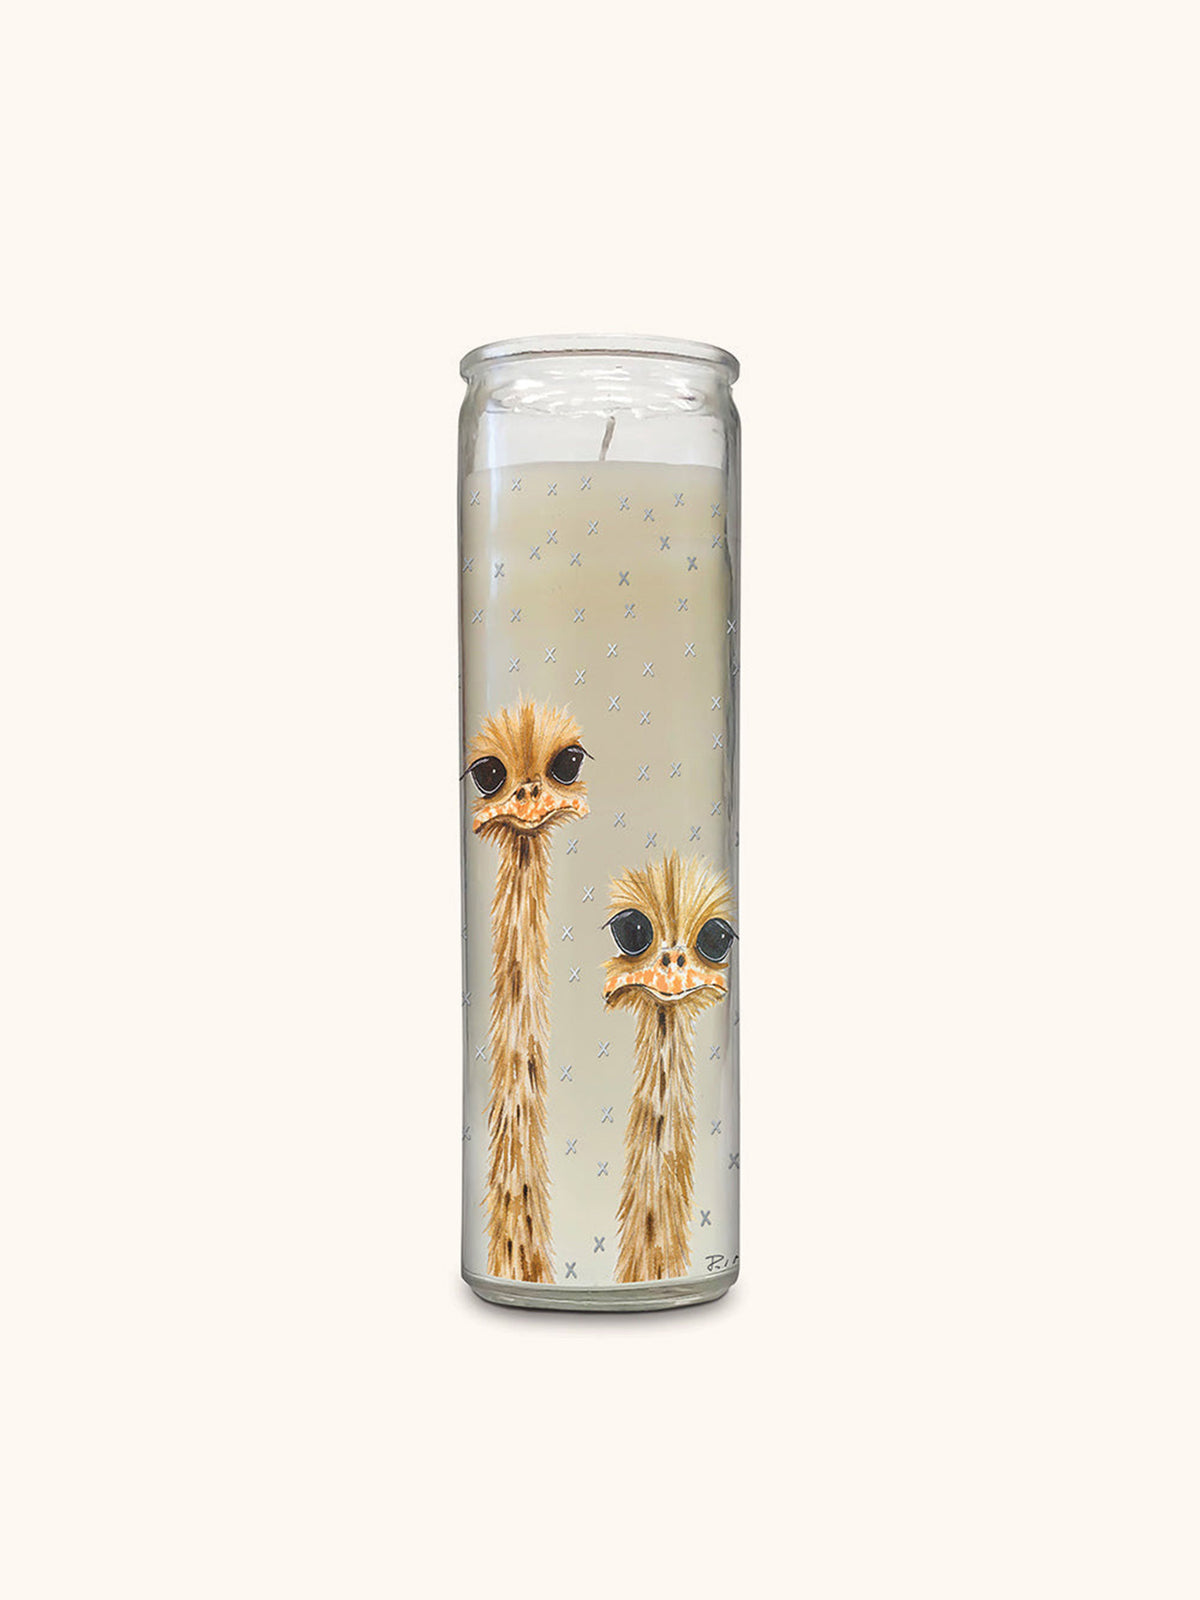 Savanna Ostrich Family Reunion Cathedral Candle